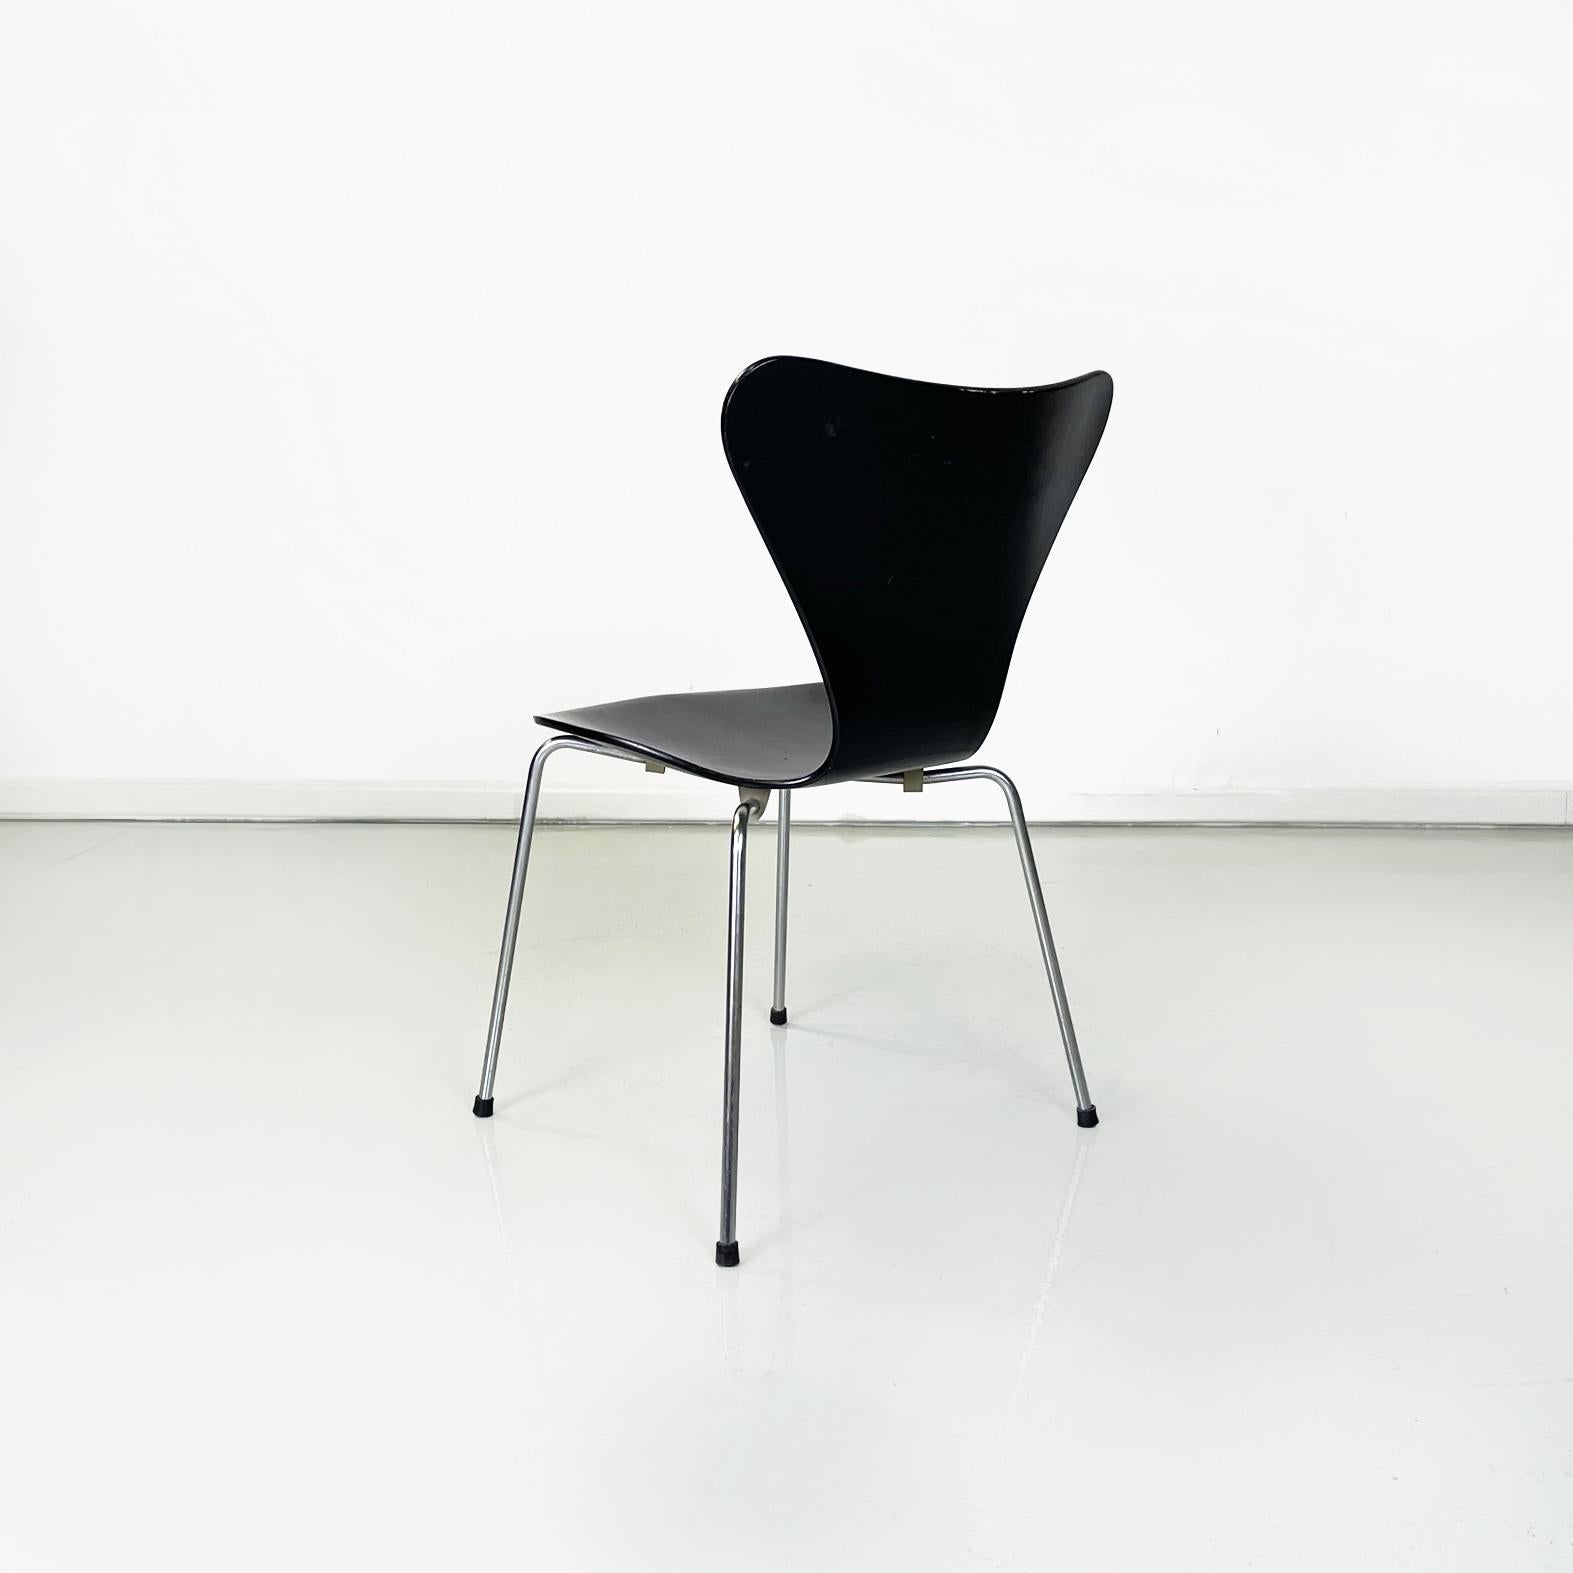 Late 20th Century Danish modern Black wood Chairs 7 Series by Jacobsen for Fritz Hansen, 1970s For Sale